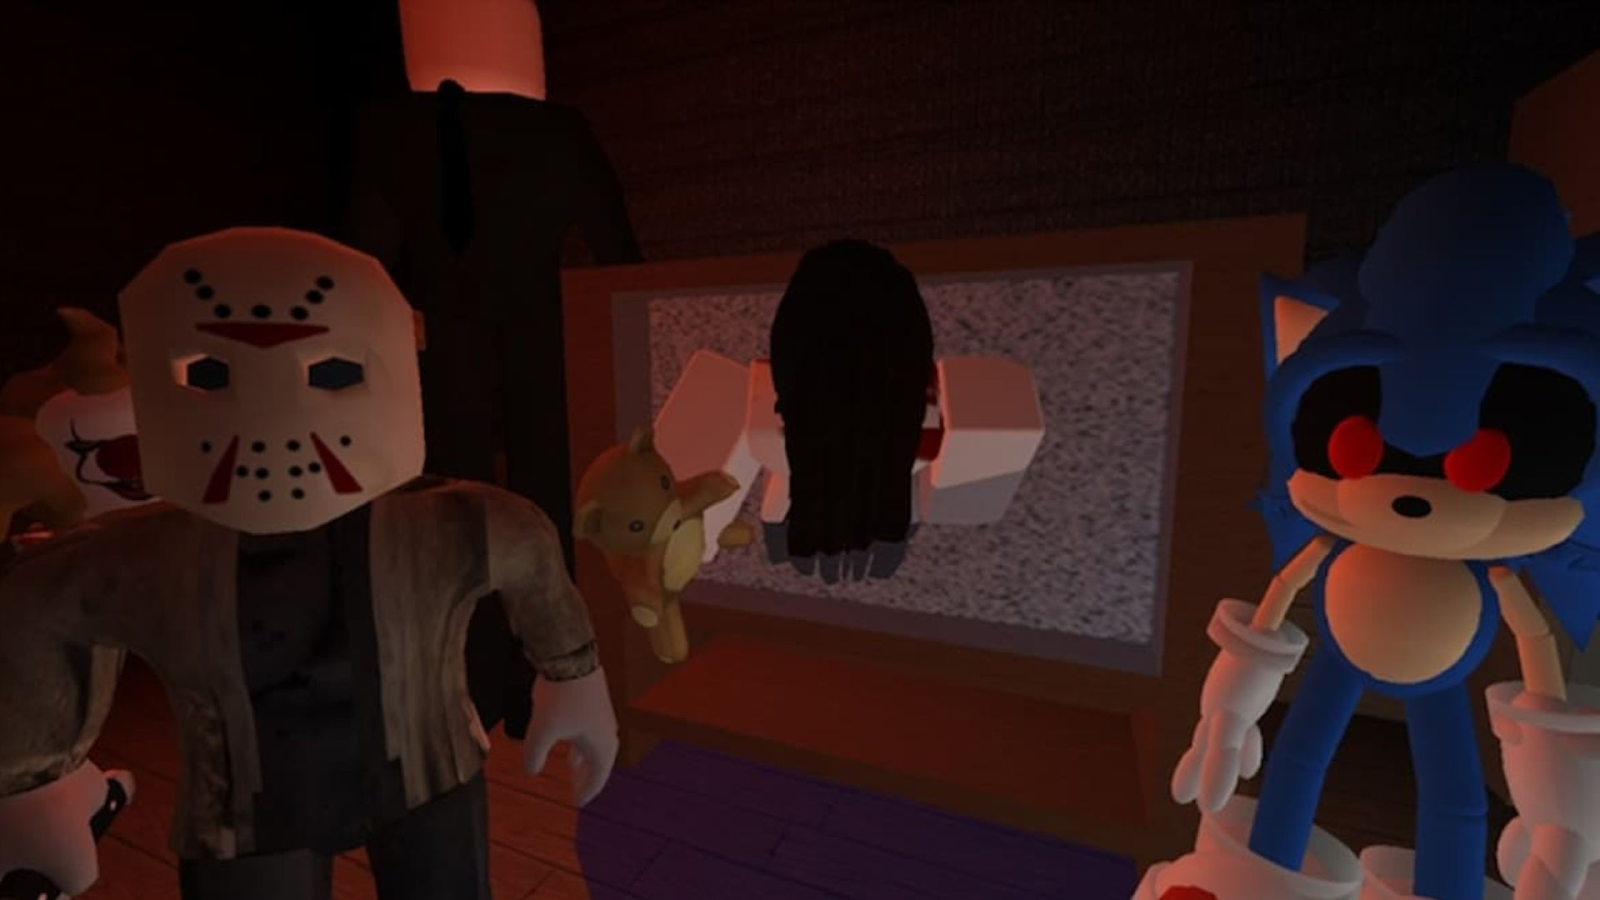 What Roblox Scary Game Should I Play?